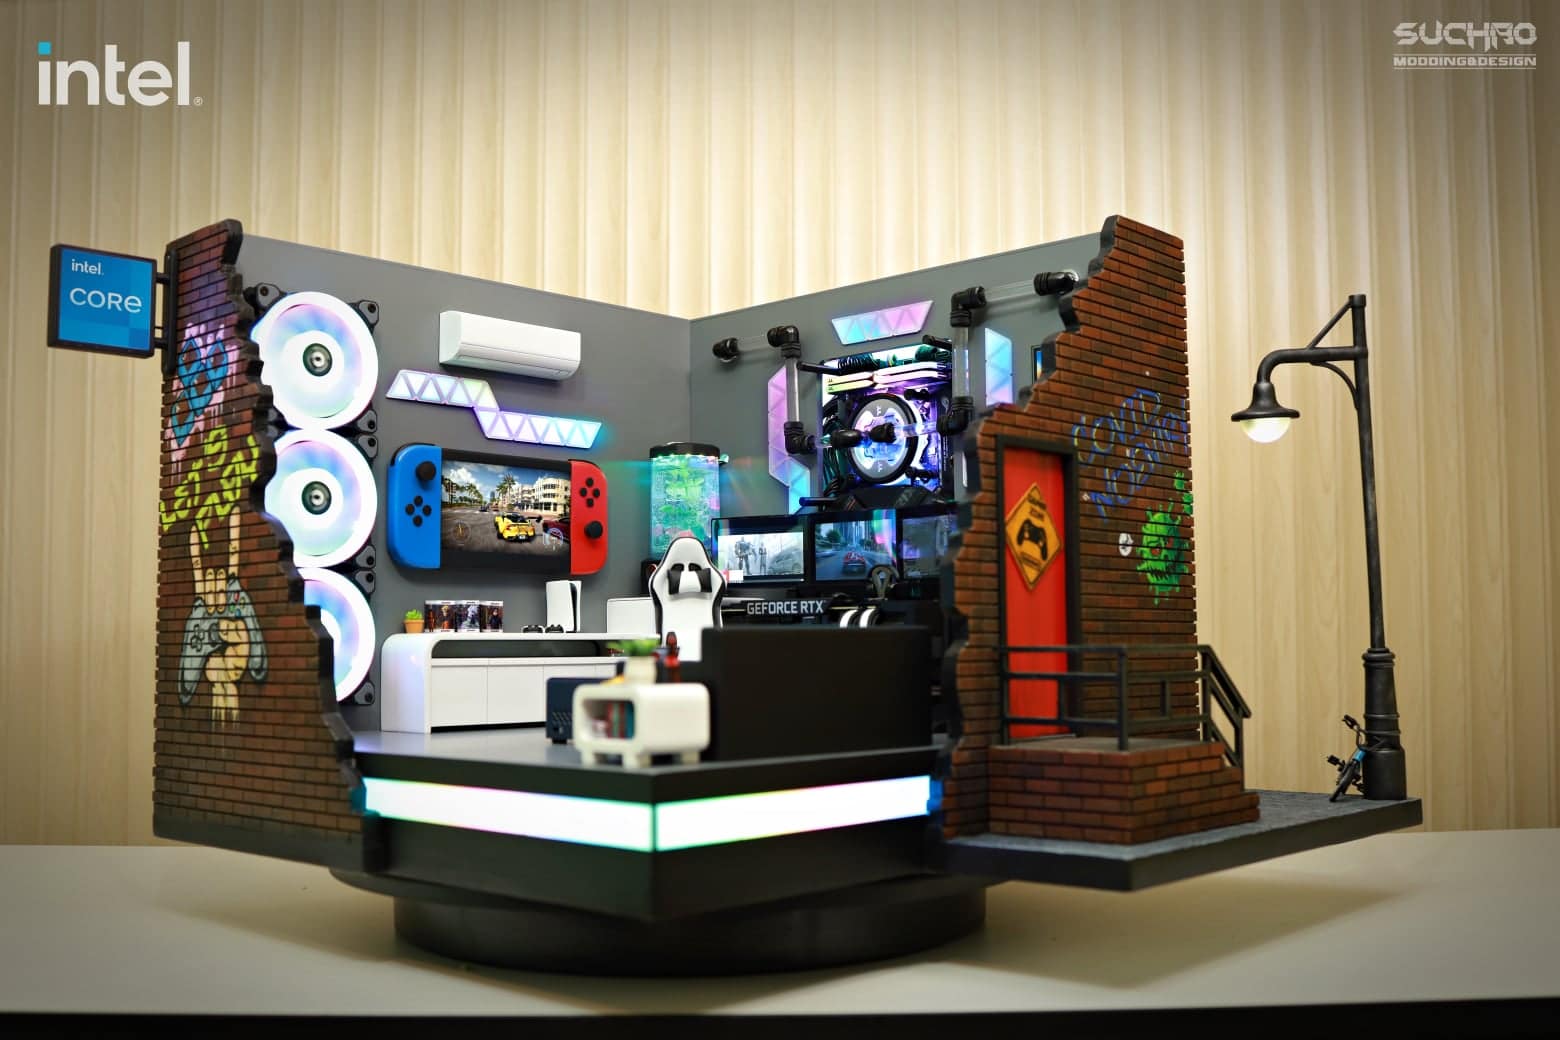 They build a gaming PC inside a diorama and it's amazing -